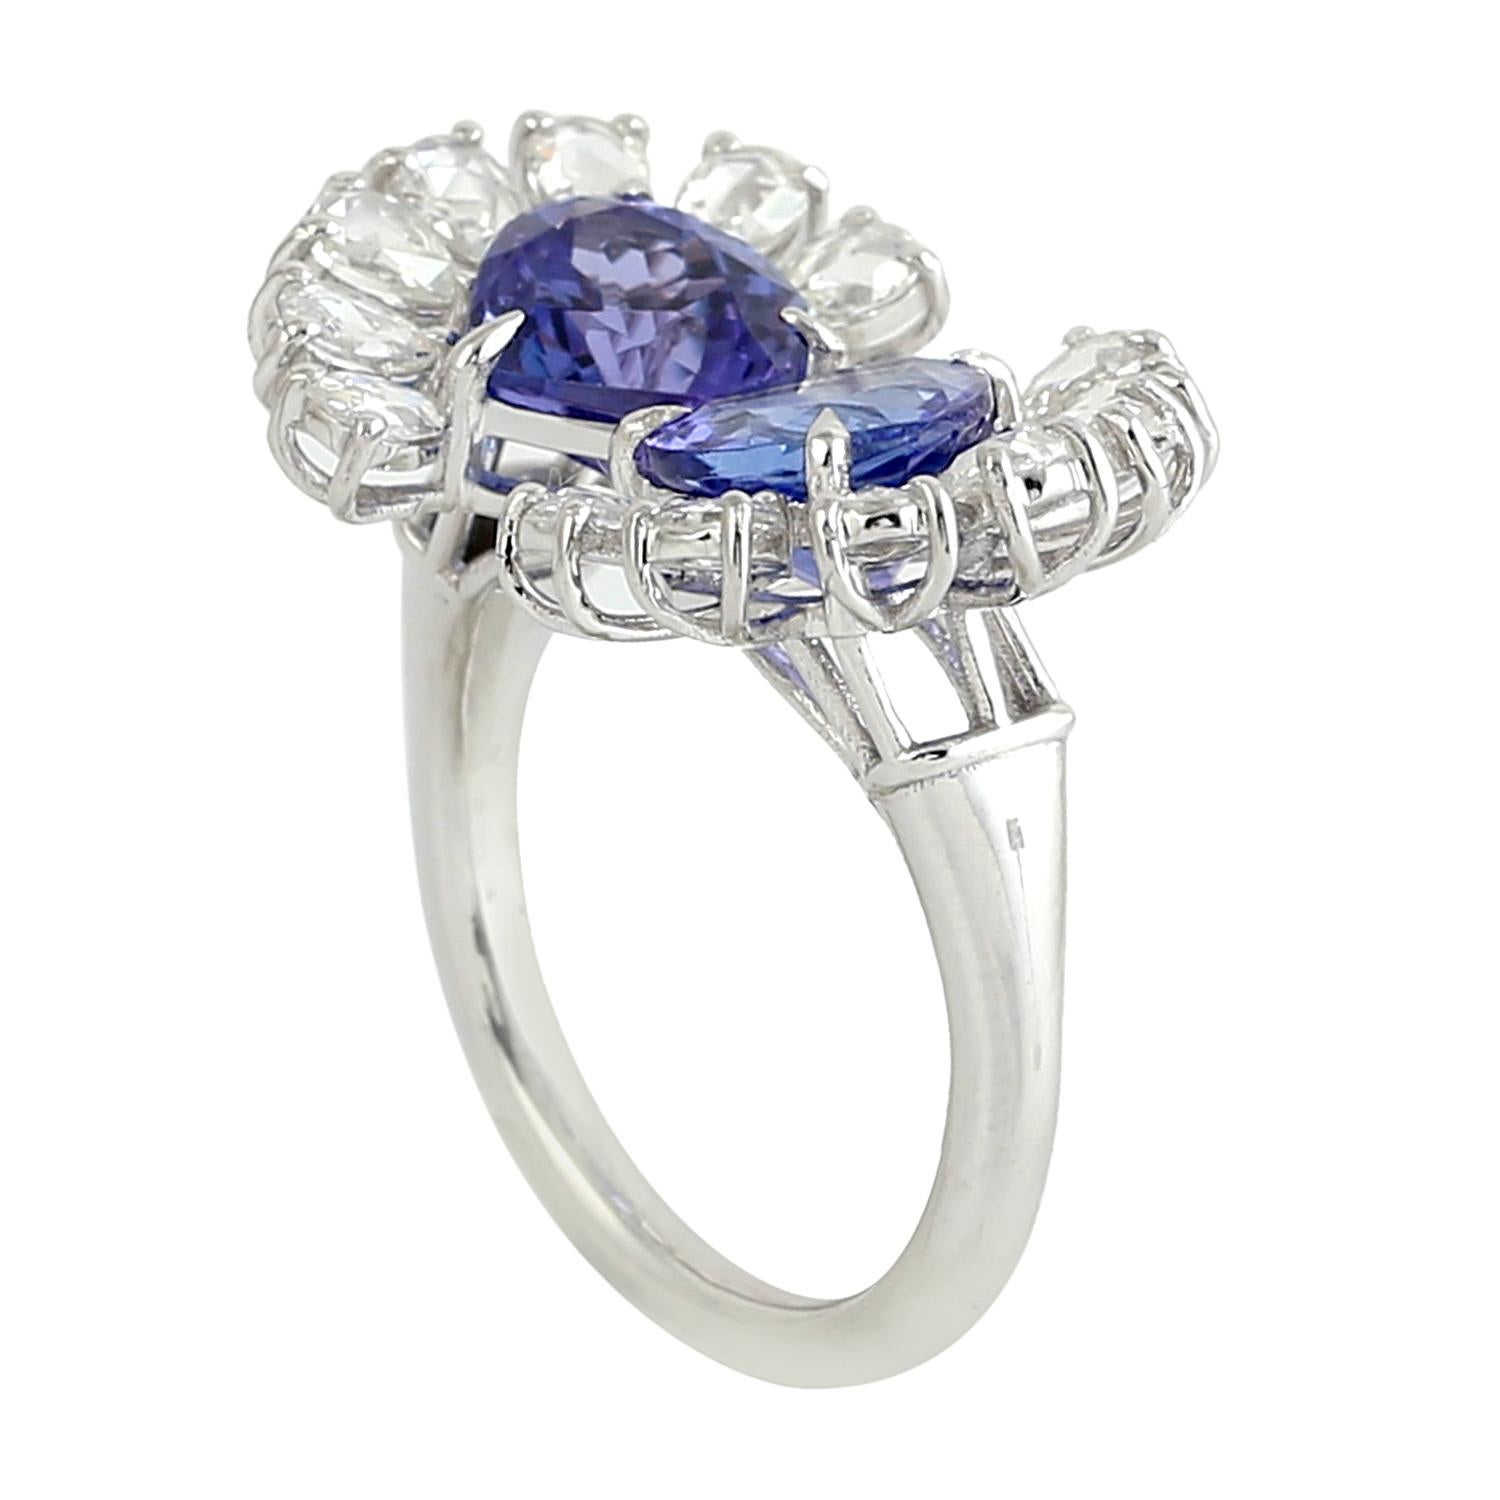 Mixed Cut Tanzanite & Rose Cut Diamond Ring Made In 18k White Gold For Sale